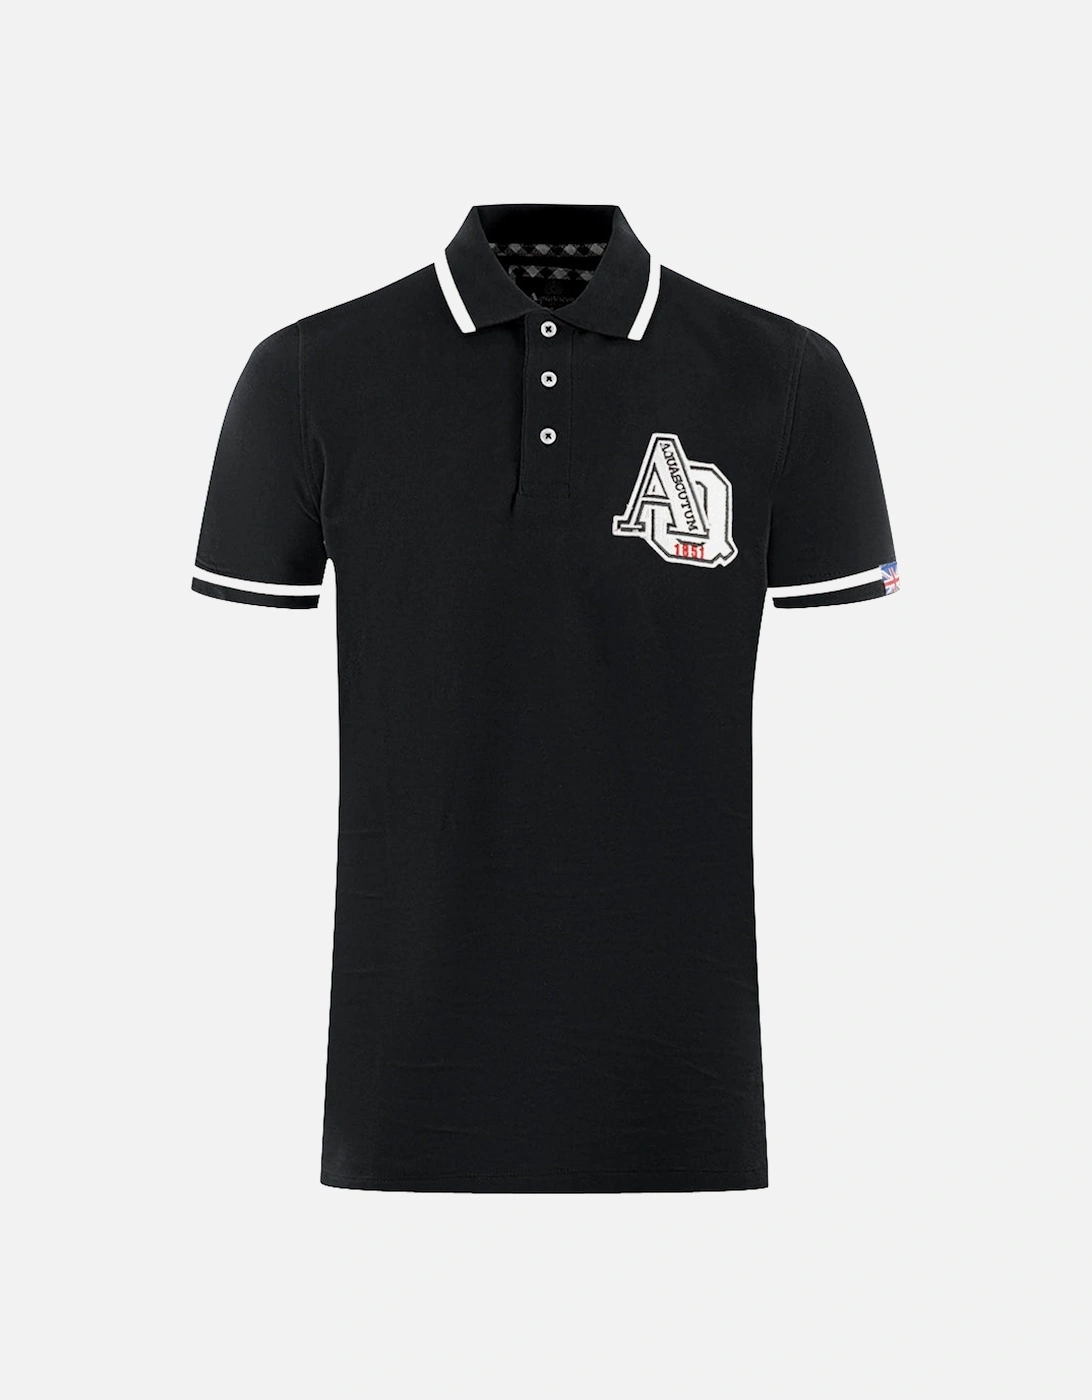 AQ 1851 Embroidered Tipped Black Polo Shirt, 4 of 3